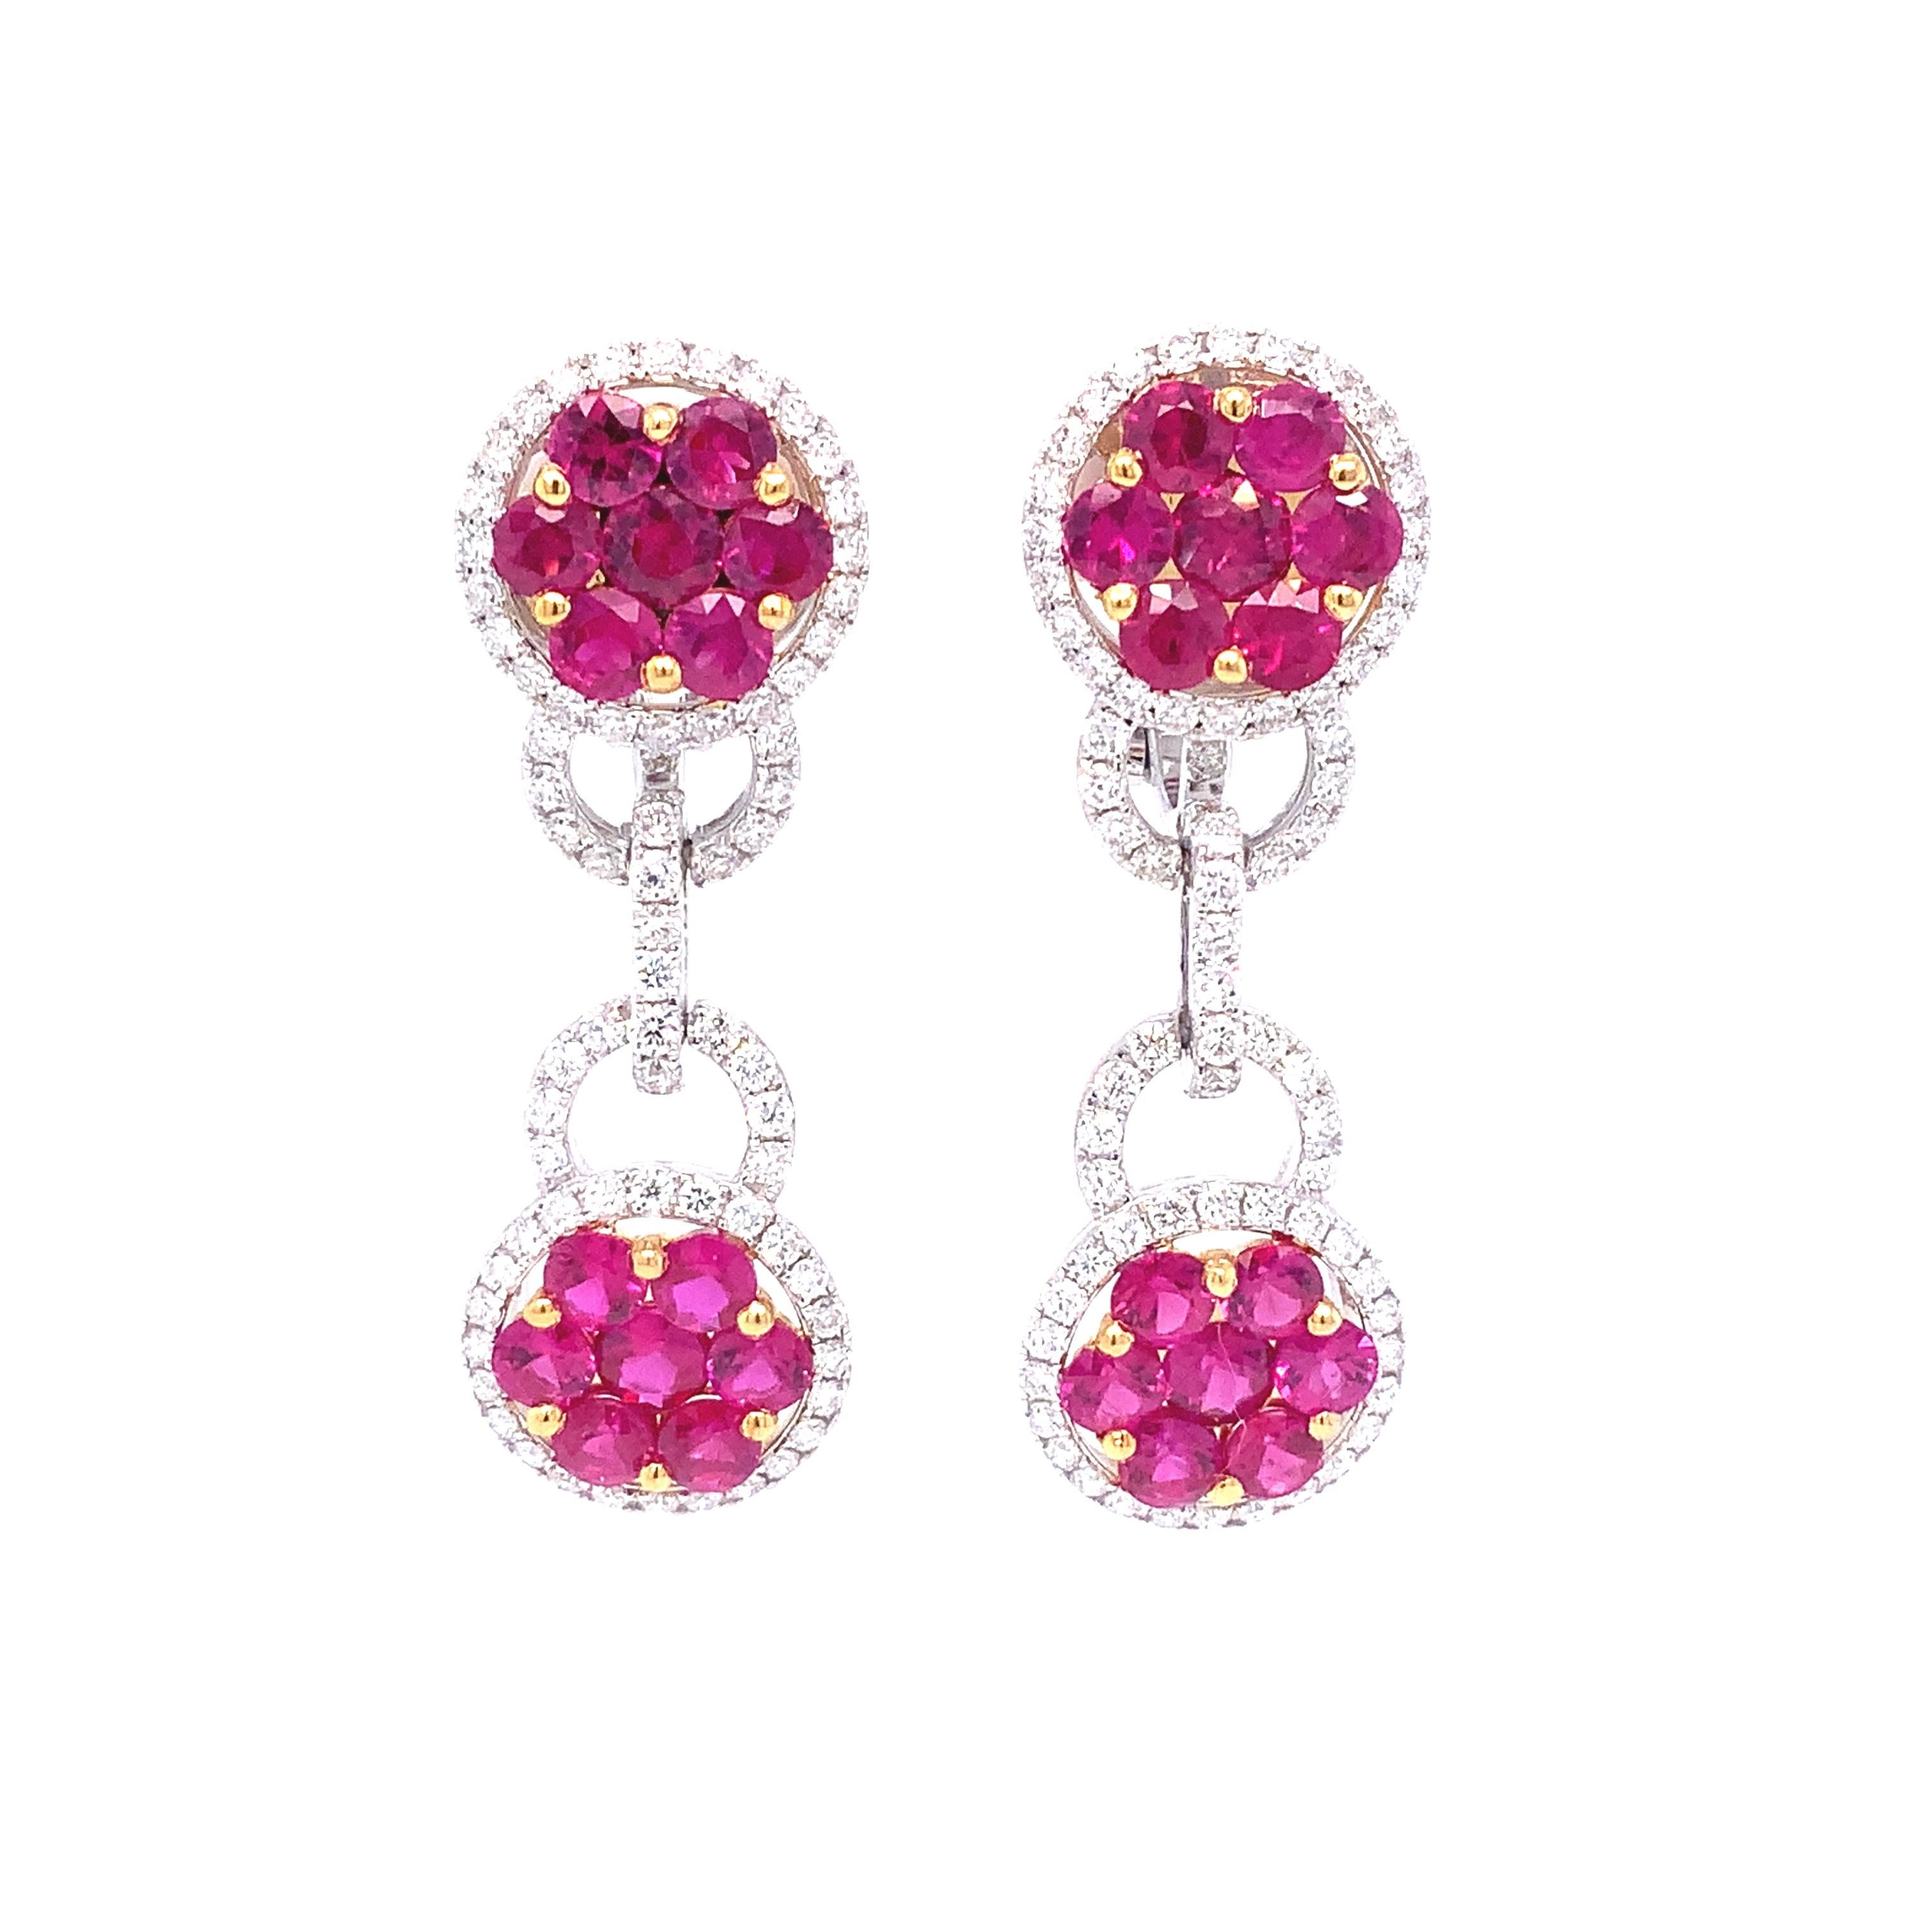 Ruby and Diamond Drop Earrings set in 18 kt White and Yellow Gold.
These ruby and diamond drop earrings are elegantly crafted in 18 kt white and yellow gold. The combination of vibrant rubies and brilliant diamonds makes these a beautiful addition